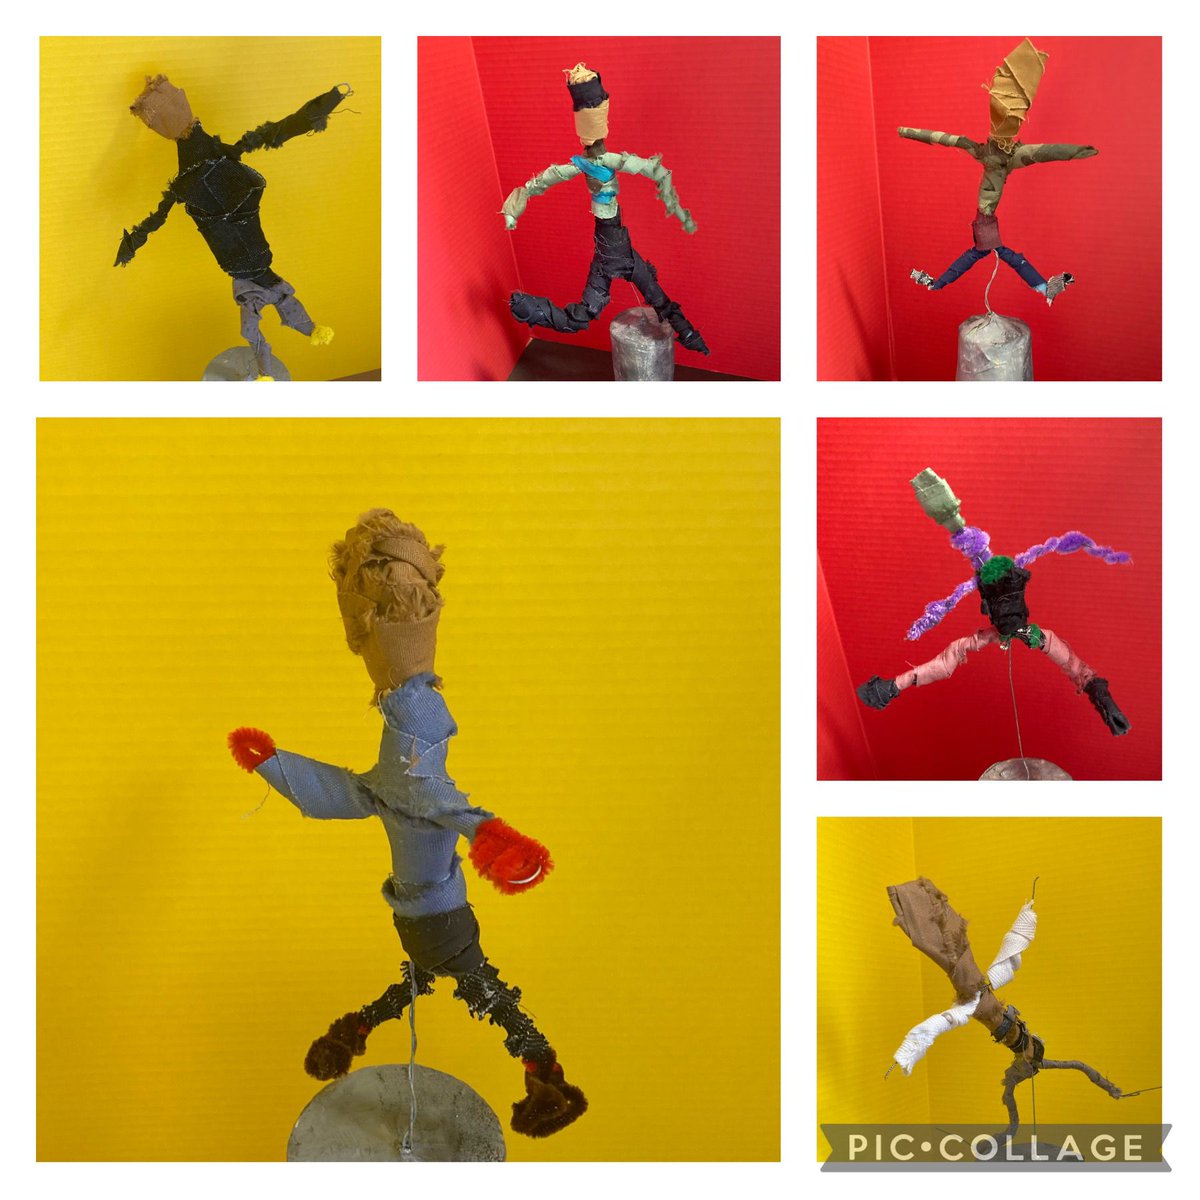 Year 4s completed plinth people project where they designed their own characters and plinths using rags and wire @NWATrust